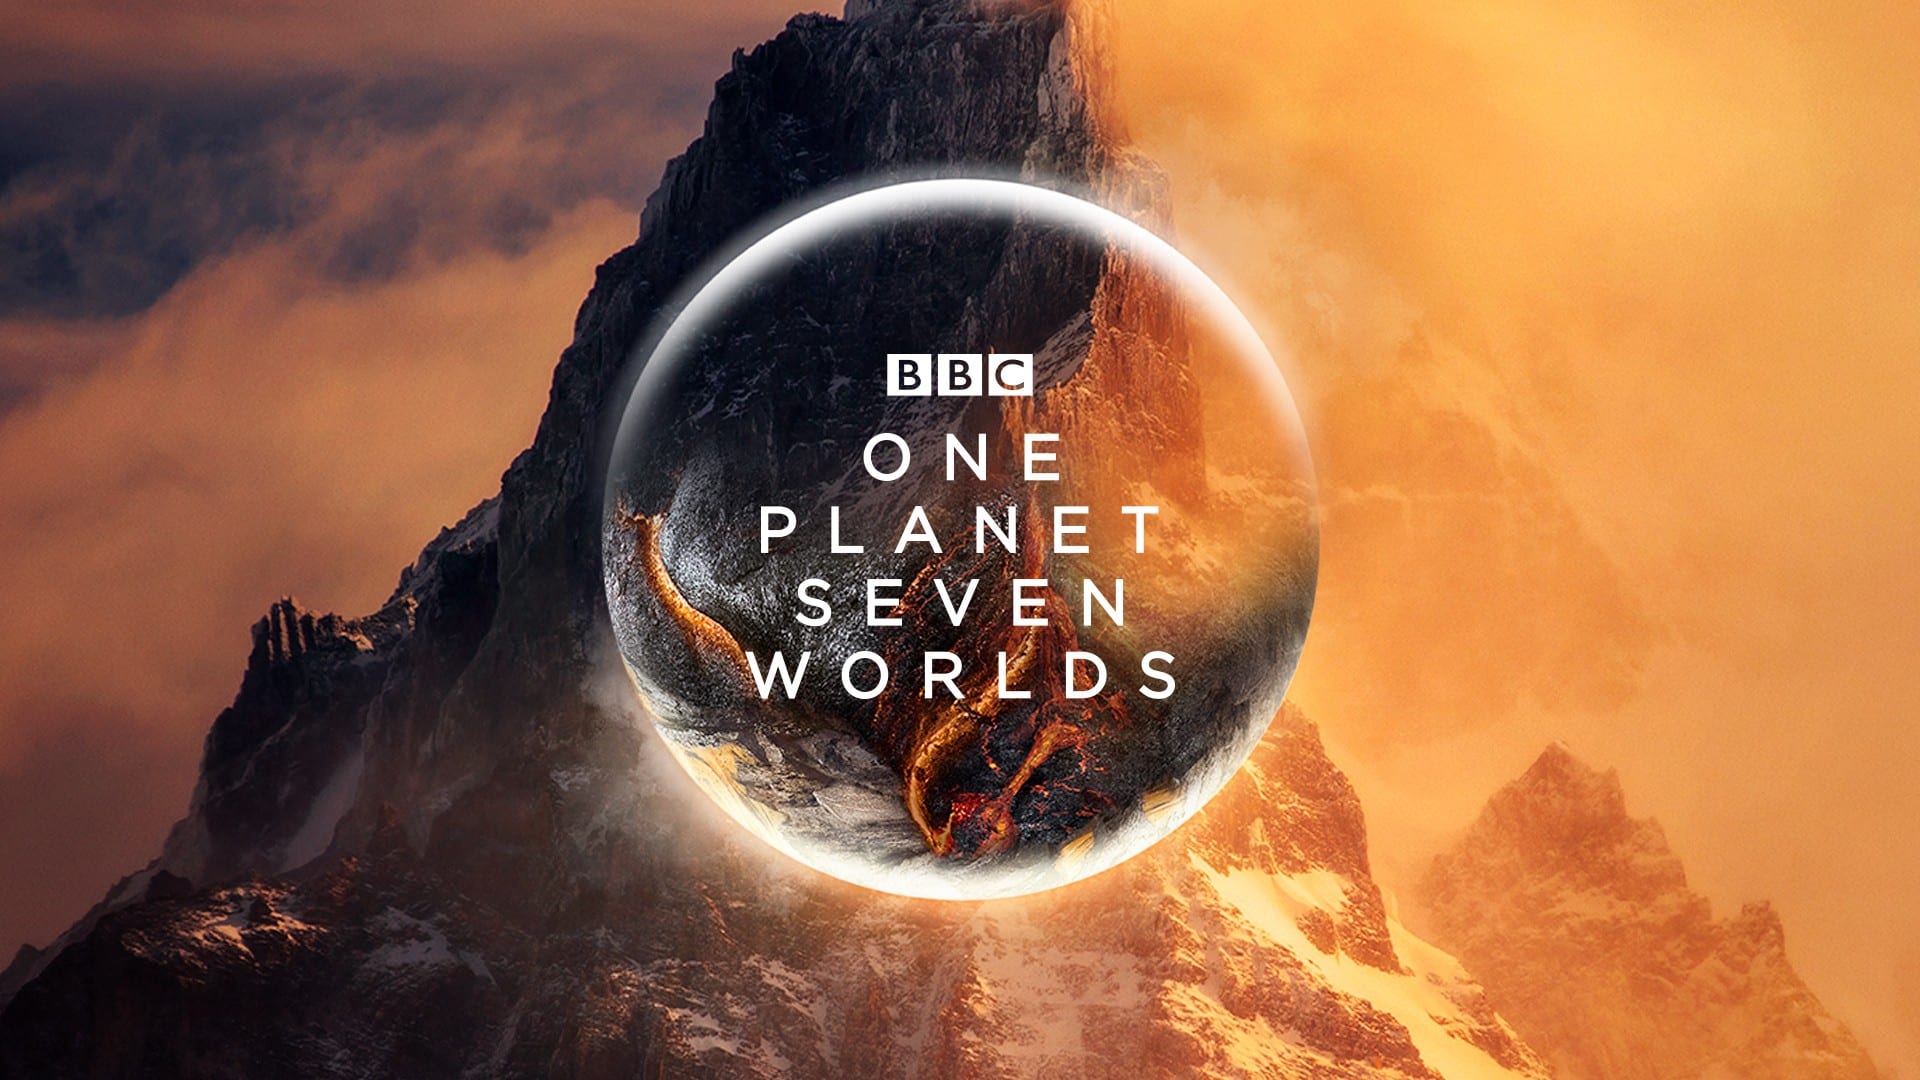 bbc-earth-s-new-project-one-planet-seven-worldsdisclosed-otakukart-news